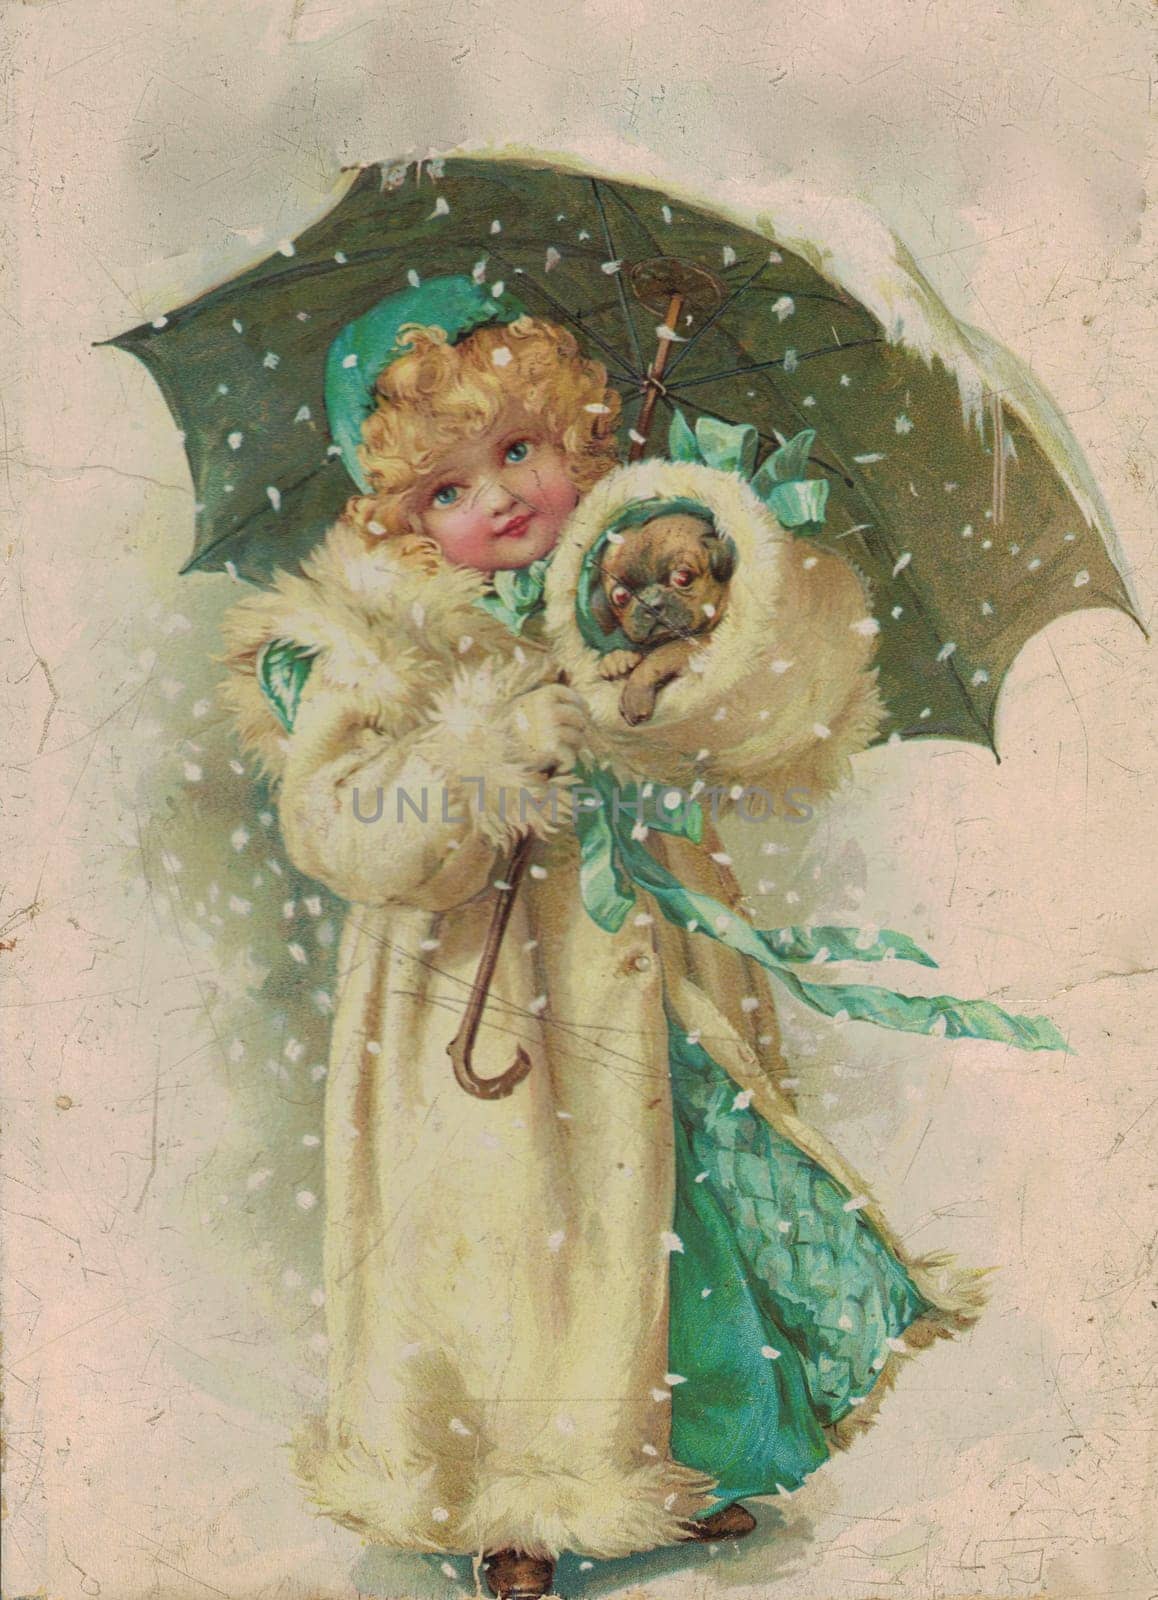 Colorful antique illustration shows a girl holds a small dog at wintertime. Vintage drawing shows the girl carries a little dog and holds umbrella in winter. Old picture from fairy tale book. Storybook illustration published 1910 by roman_nerud